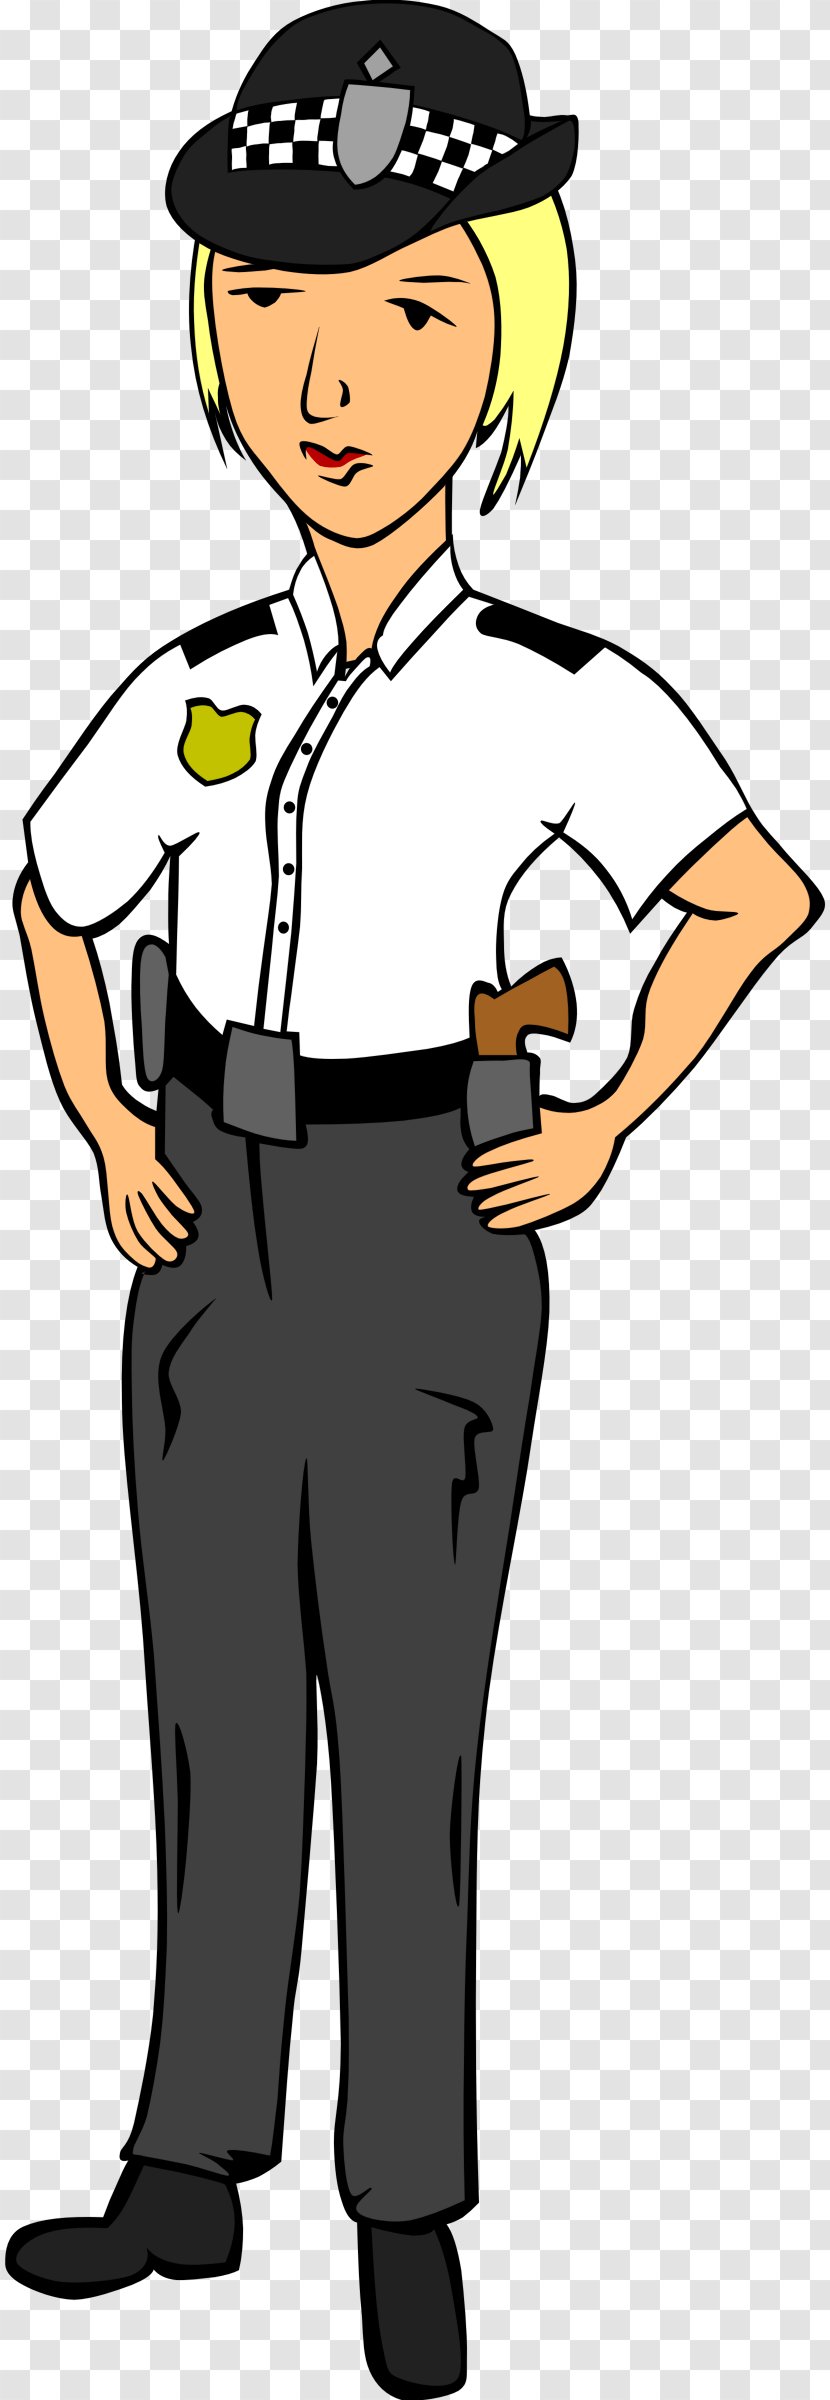 Police Officer Woman Clip Art - Human Transparent PNG